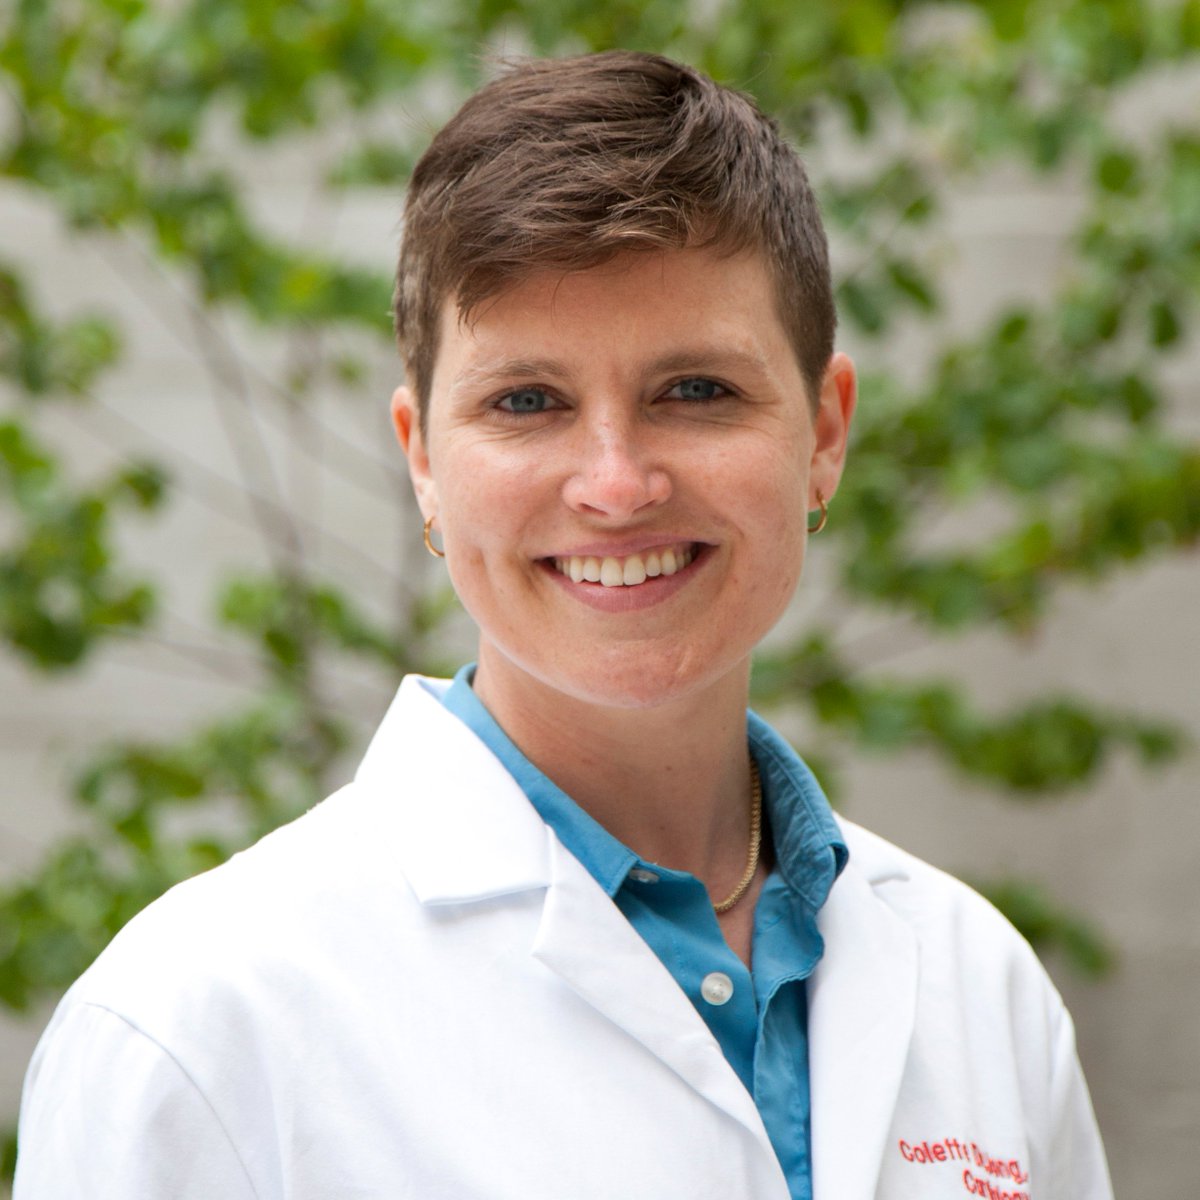 Congratulations Dr. @colettedejong for her election to the board of the UCSF Gold-Headed Cane Society, which recognizes students and faculty from @UCSF who “exemplify the qualities of a true physician.' Dr. DeJong was awarded membership in 2017 and elected to the board in 2022.